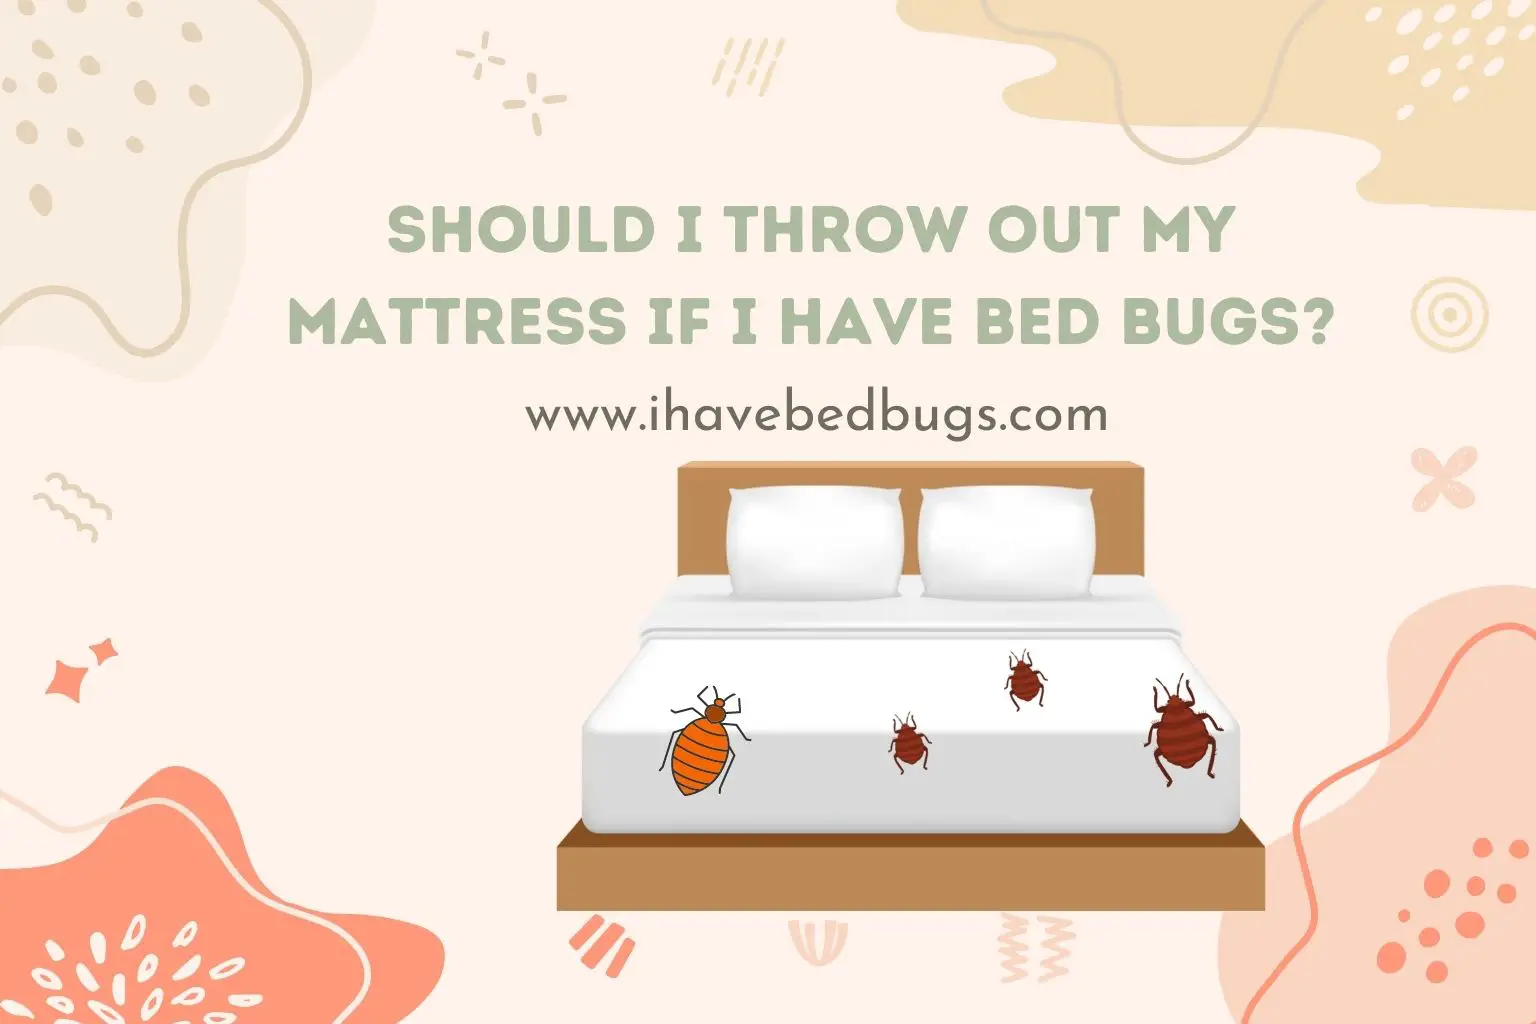 Should I throw out my mattress if I have bed bugs